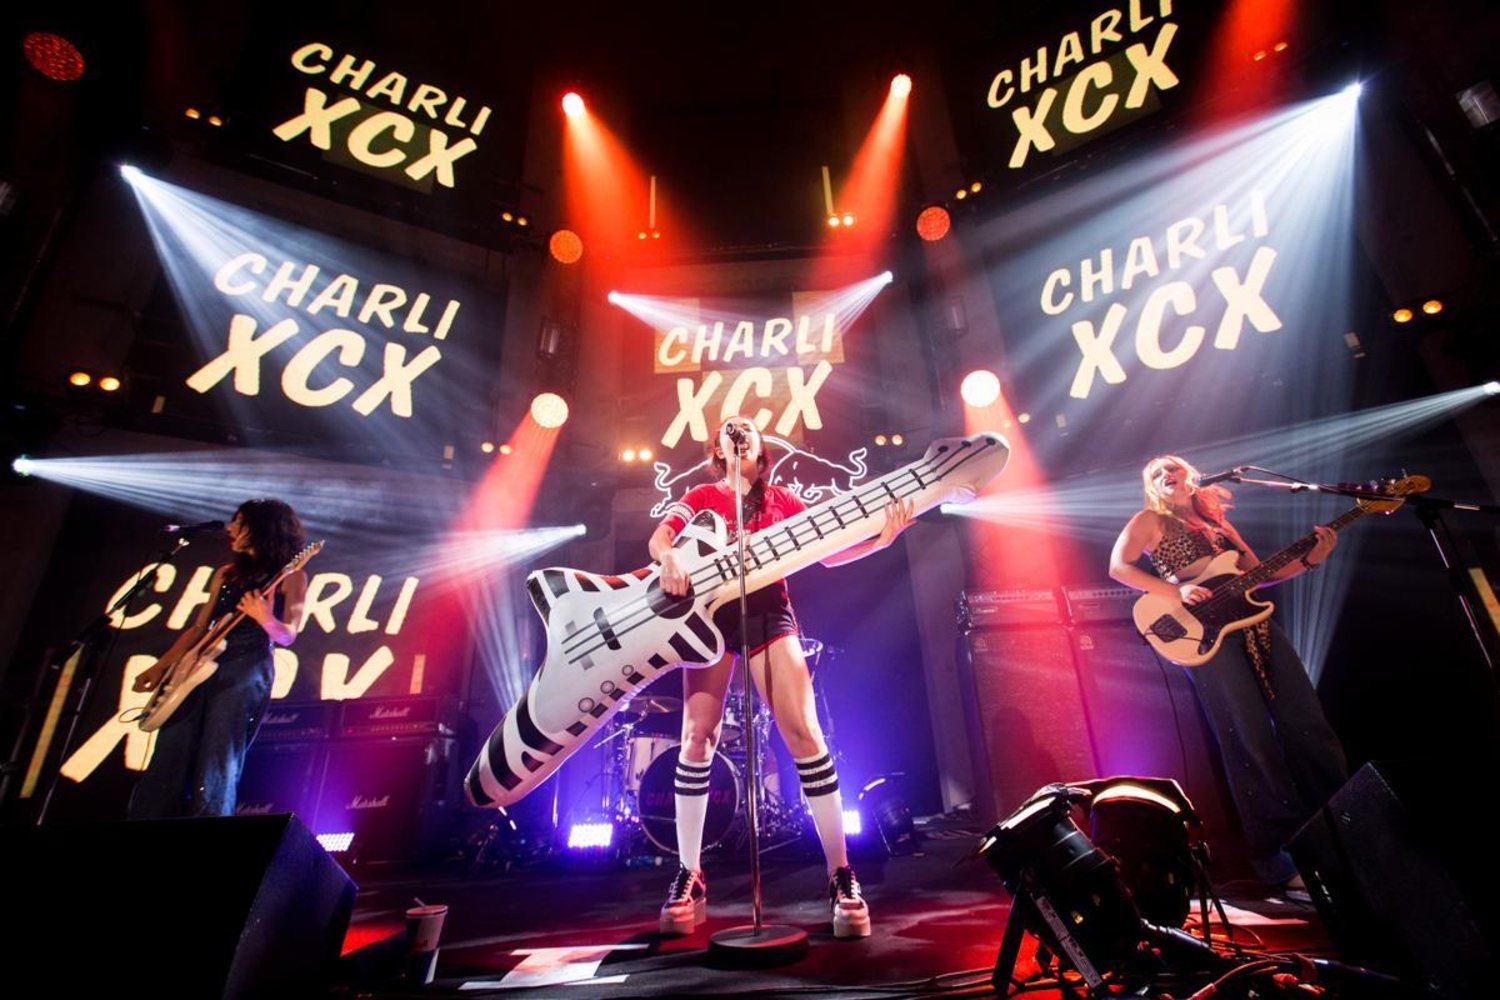 Charli xcx concert inflatable guitar prop being used by the lead singer